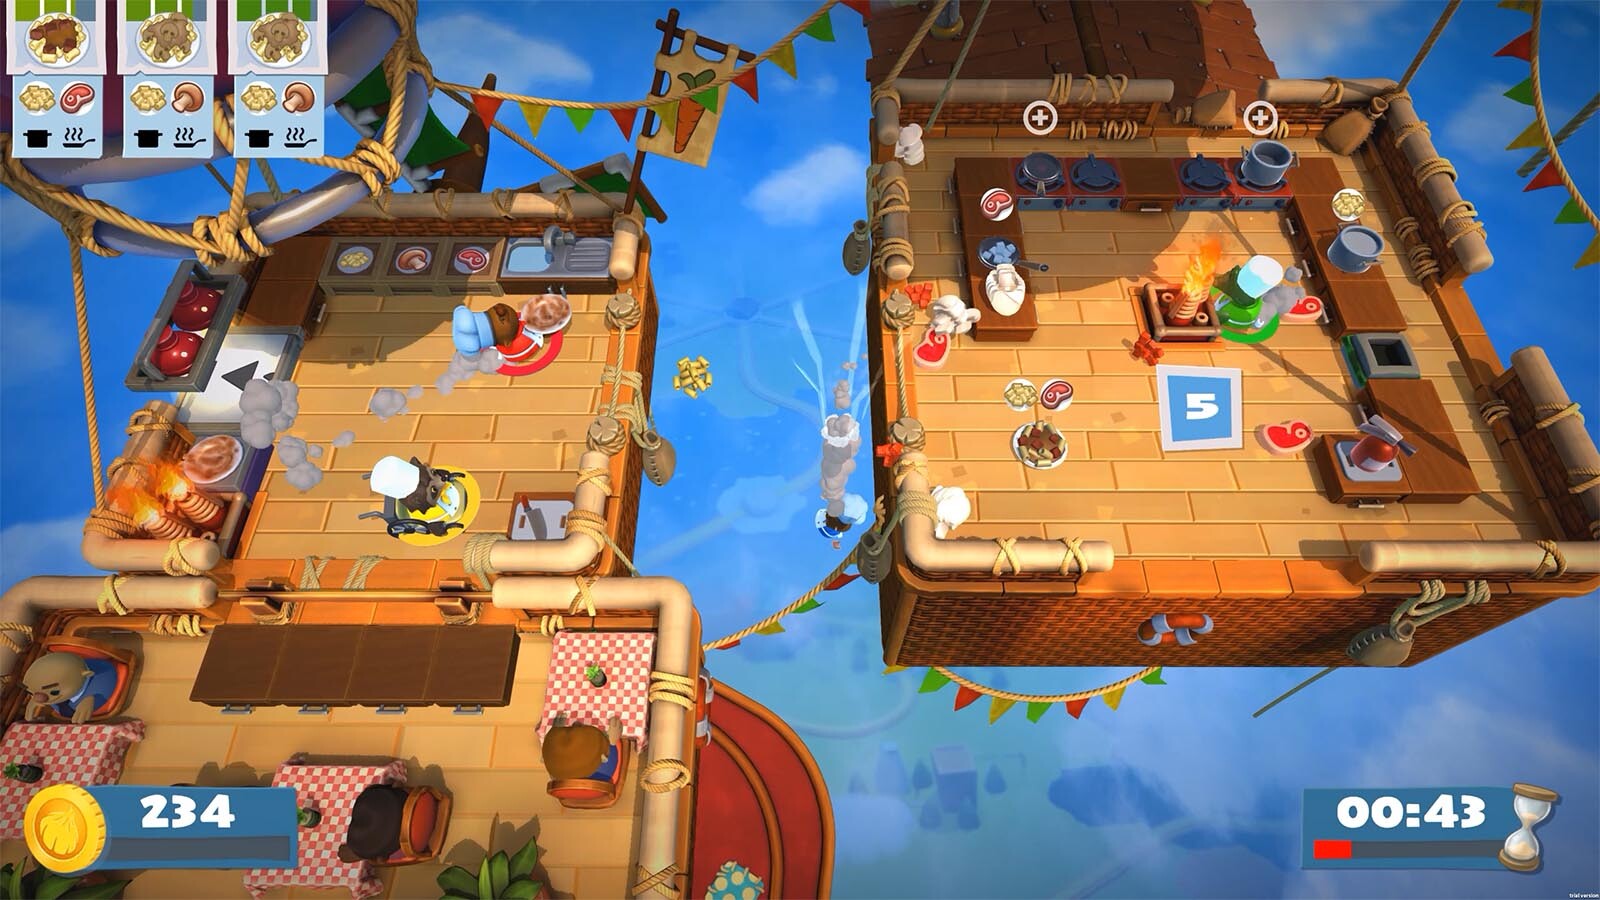 Is Overcooked 2 available on PC?